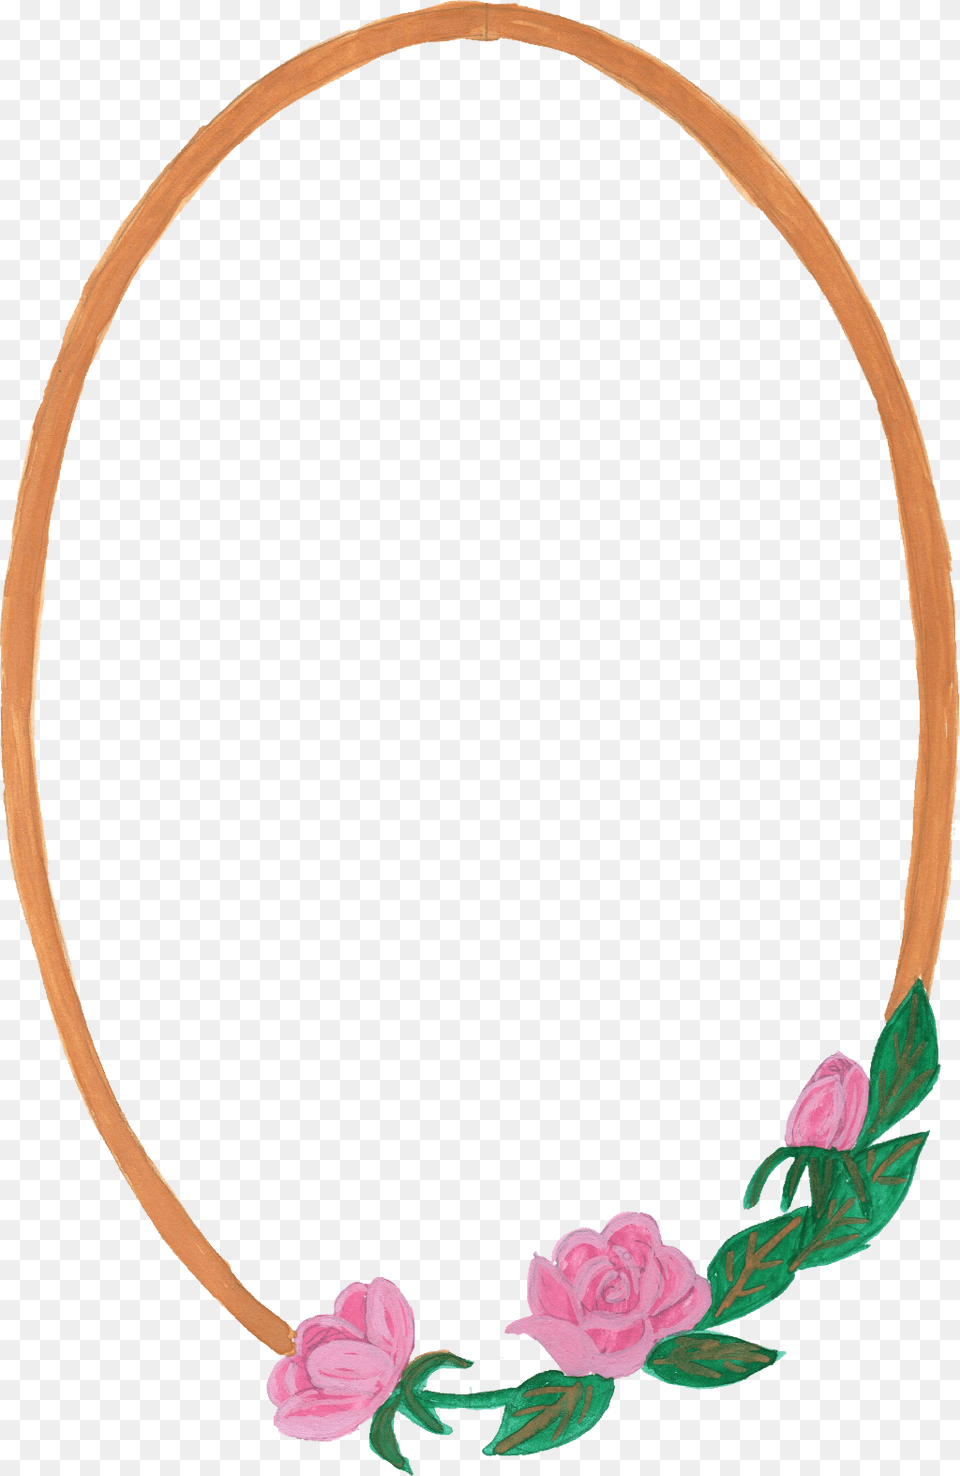 Download Watercolor Frame Kisspng, Accessories, Jewelry, Necklace, Oval Png Image